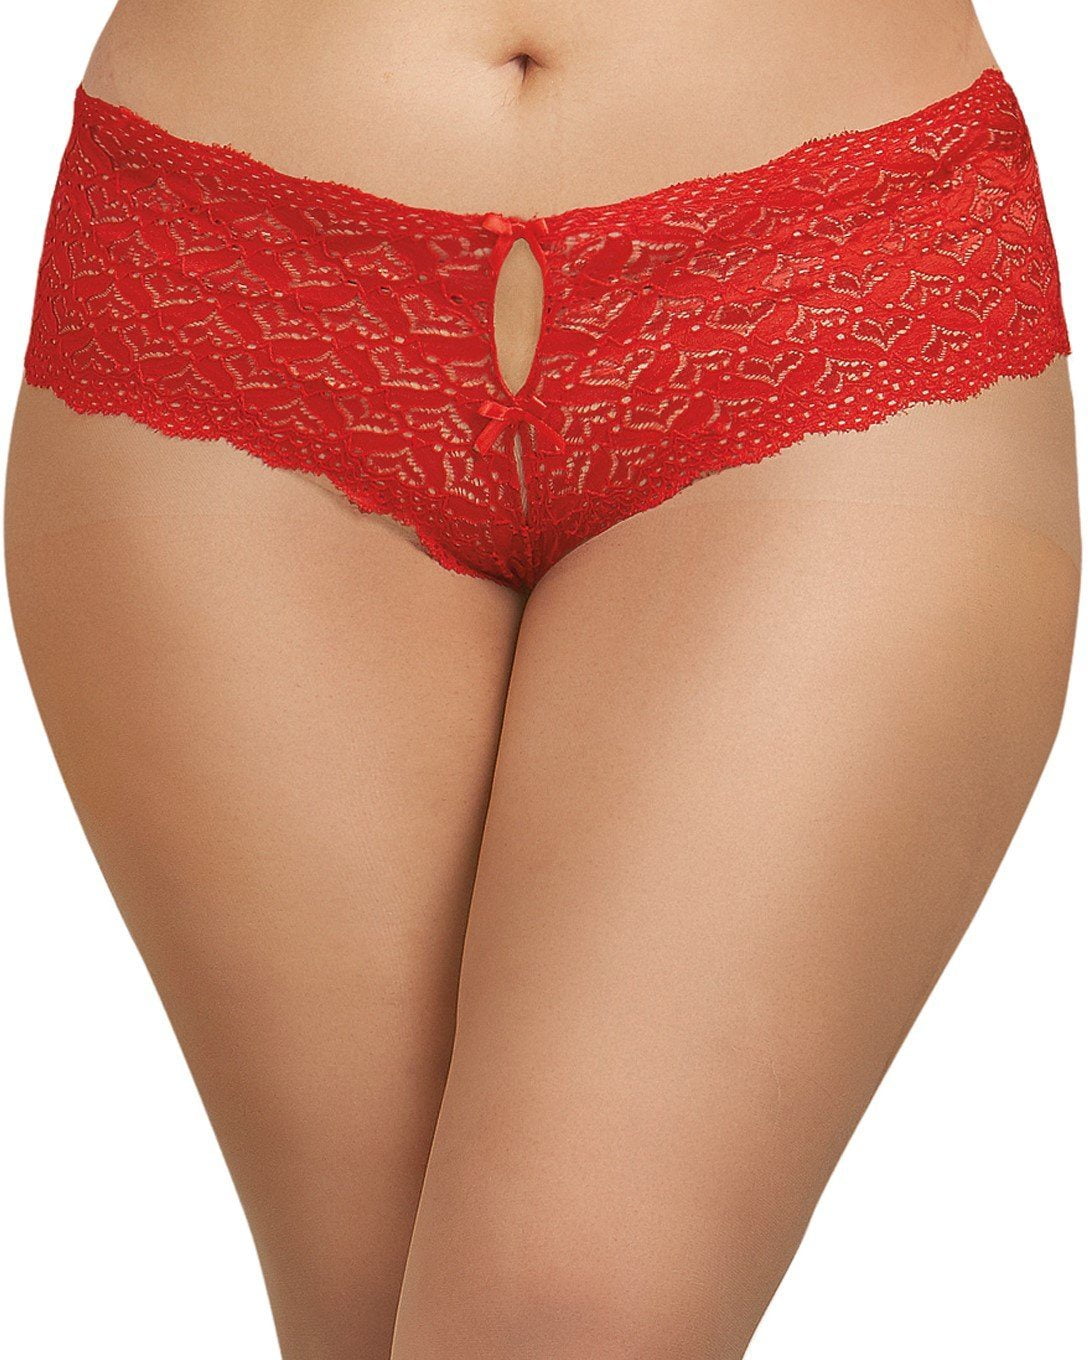 Dreamgirl Women's Lace Lingerie Panty with Heart Cutout Back - ShopStyle  Panties